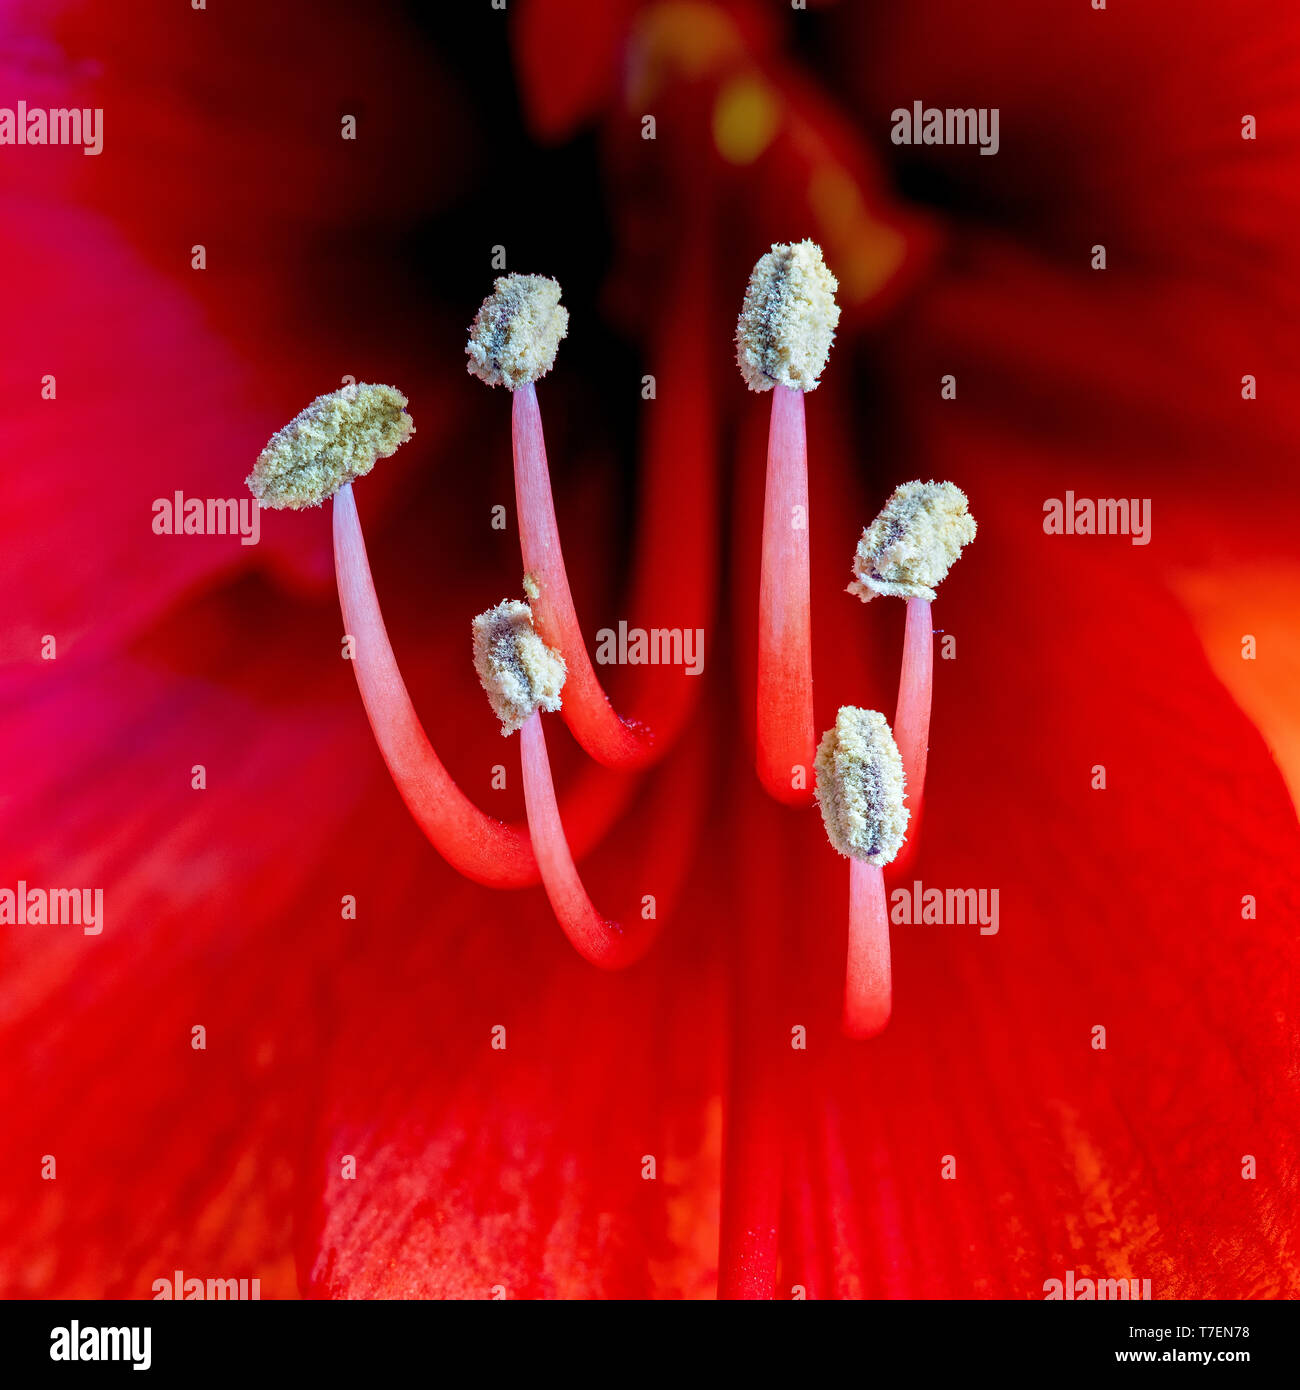 Close up view of the stamens on an amaryllis in bloom, showing in detail the filament (stem) and the pollen filled anther (top) Stock Photo